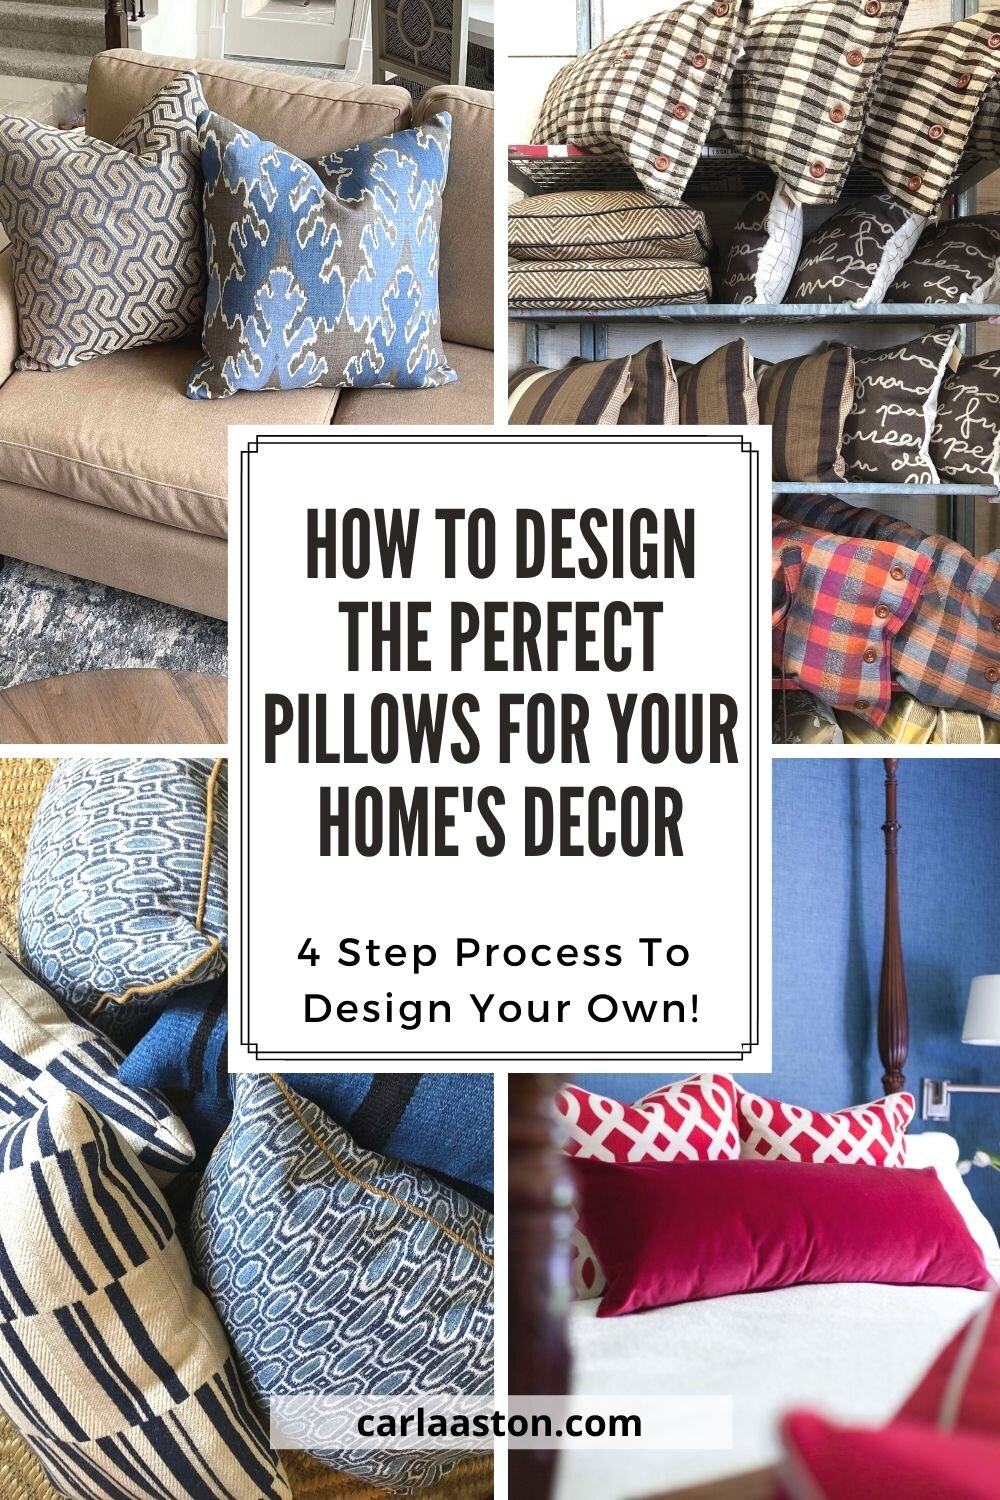 How To Pick Perfect Decorative Throw Pillows For Your Sofa, Bed Or